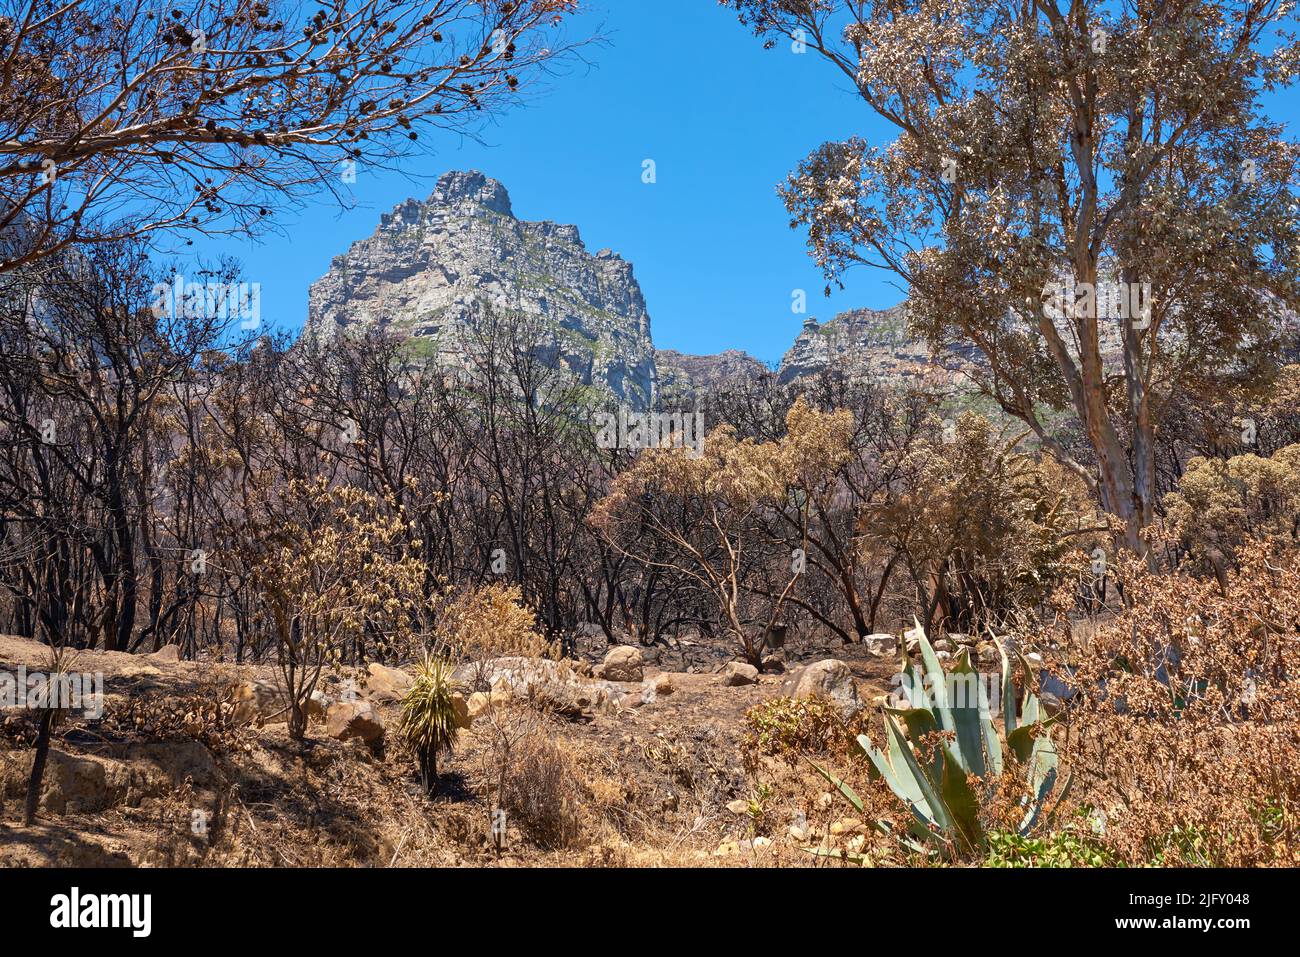 Landscape of burnt trees after a bushfire on Table Mountain, Cape Town, South Africa. Outcrops of a mountain against blue sky with dead bushes. Black Stock Photo